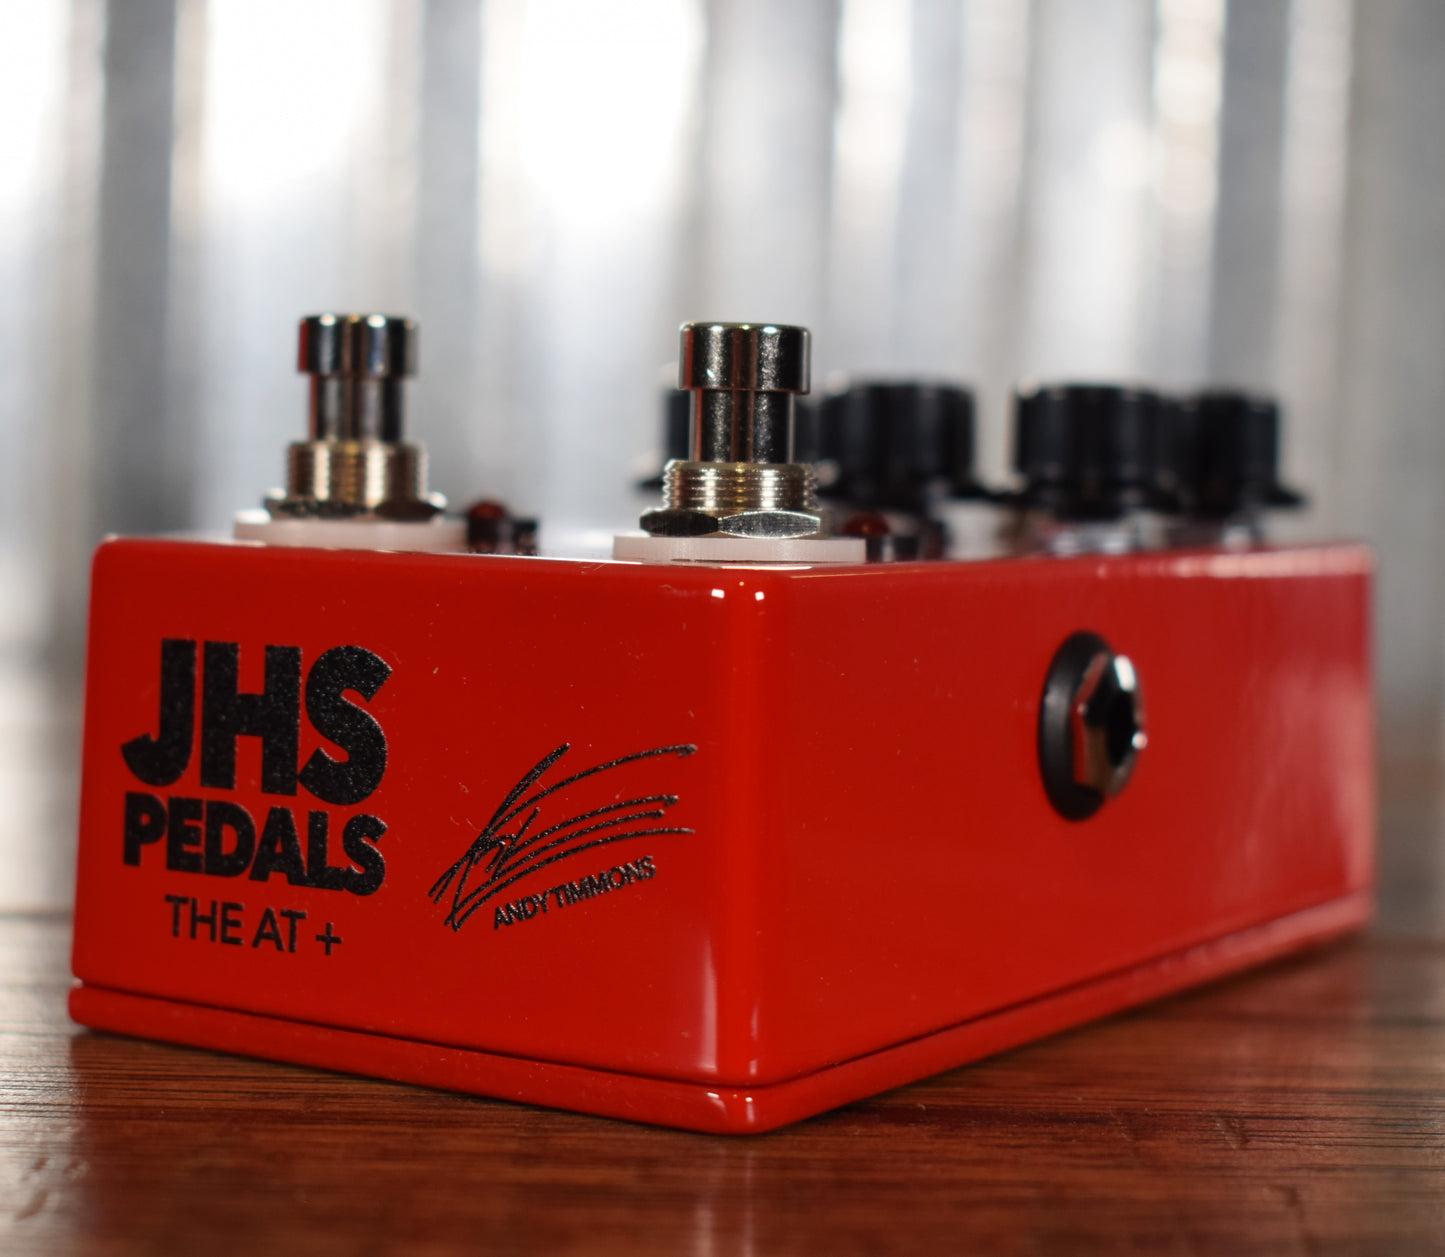 JHS Pedals The AT+Plus  Andy Timmons Overdrive Boost Guitar Effect Pedal Demo